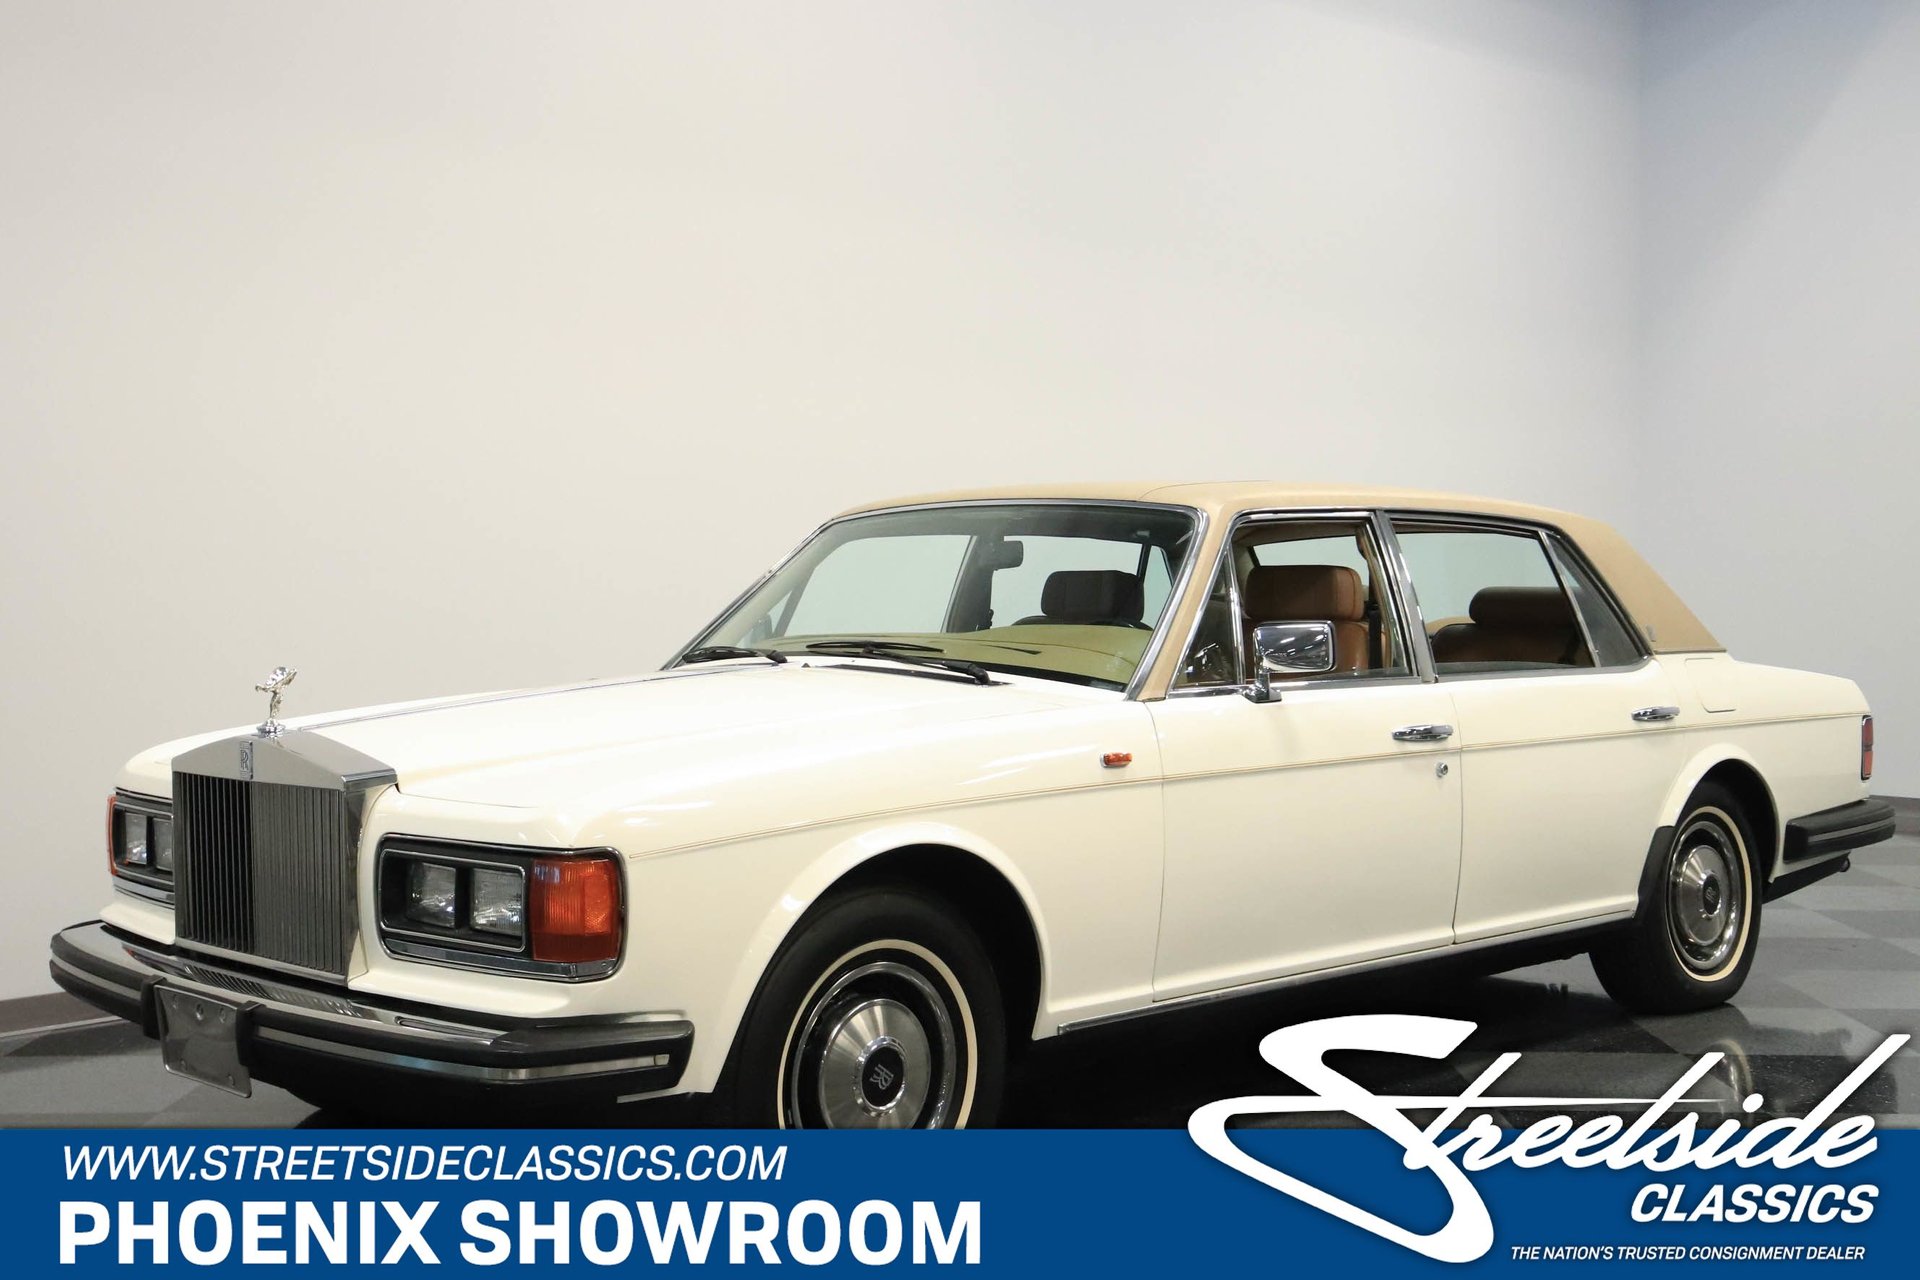 1983 Rolls-Royce Silver Spur | Classic Cars for Sale - Streetside Classics